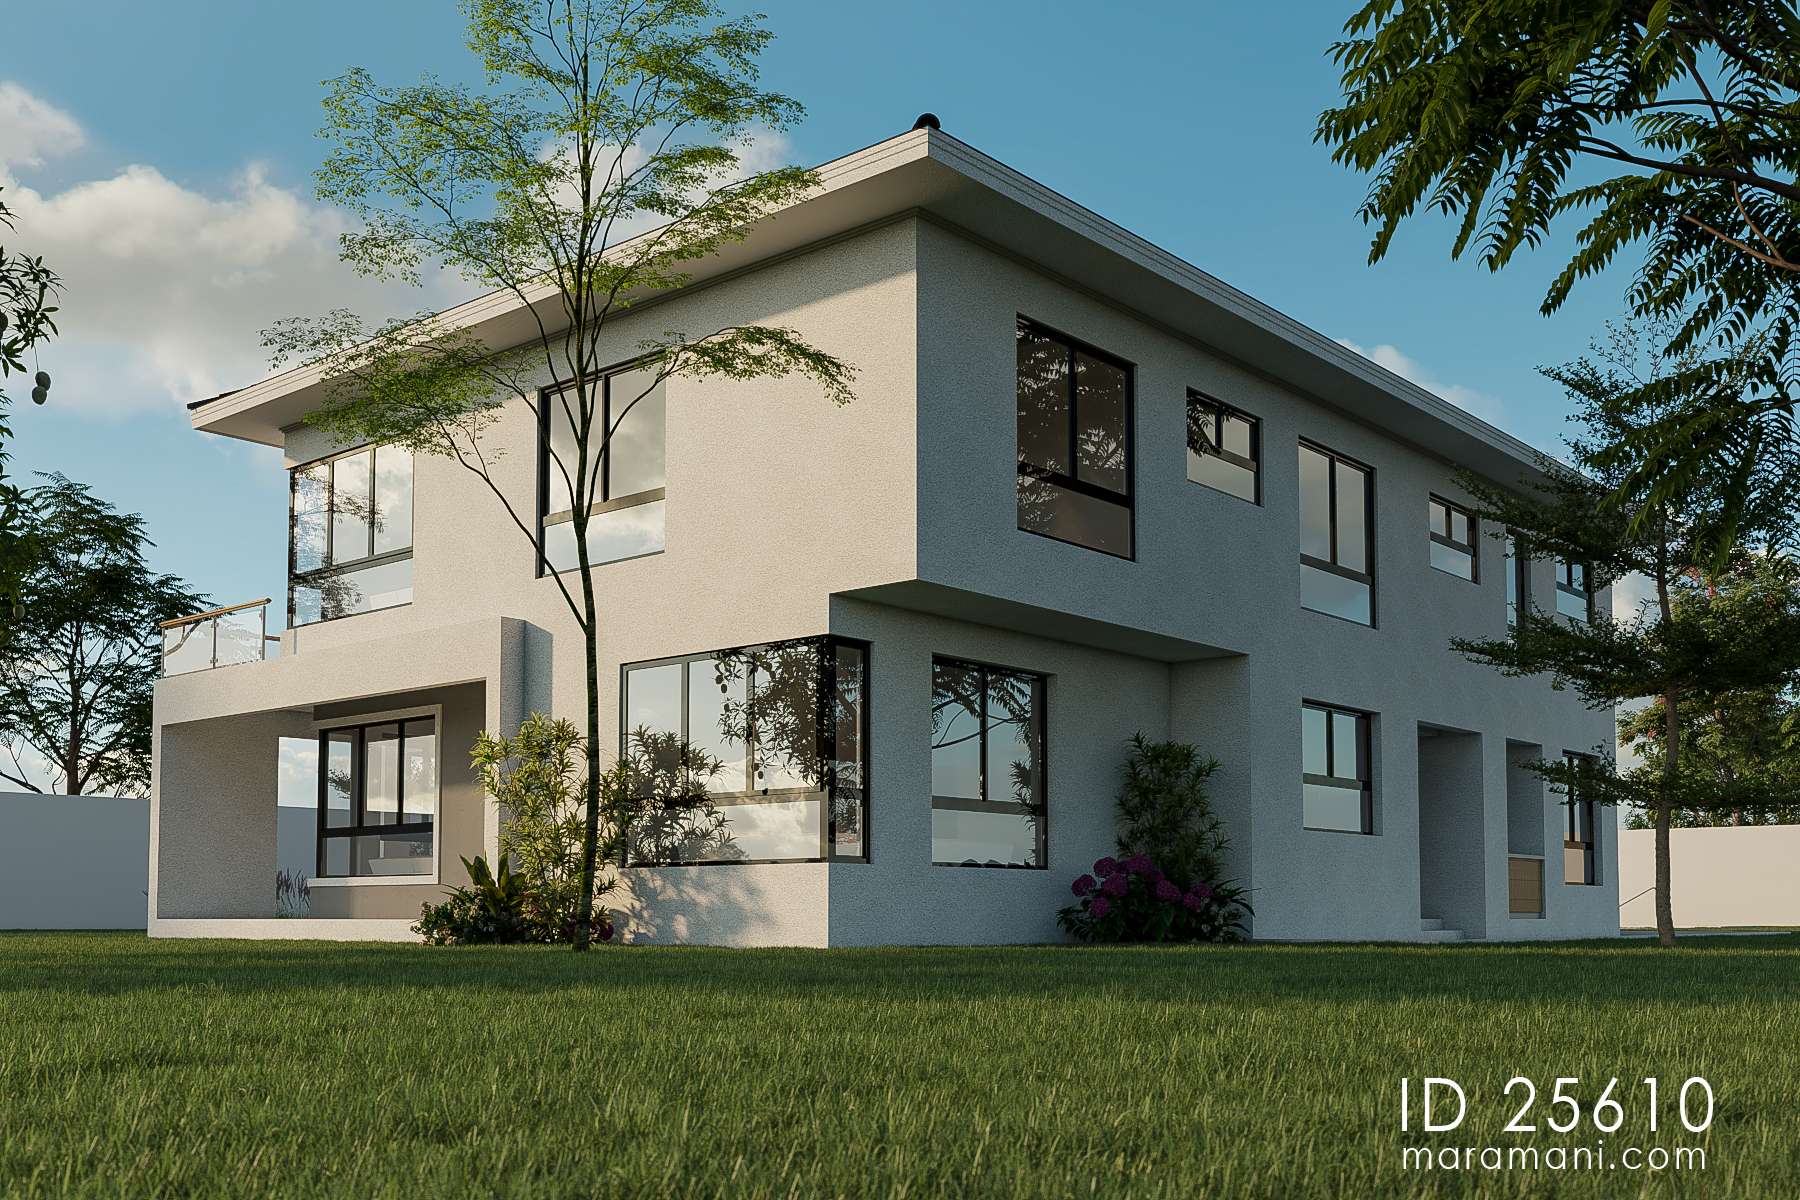 5 bedroom Contemporary modern house - ID 25610